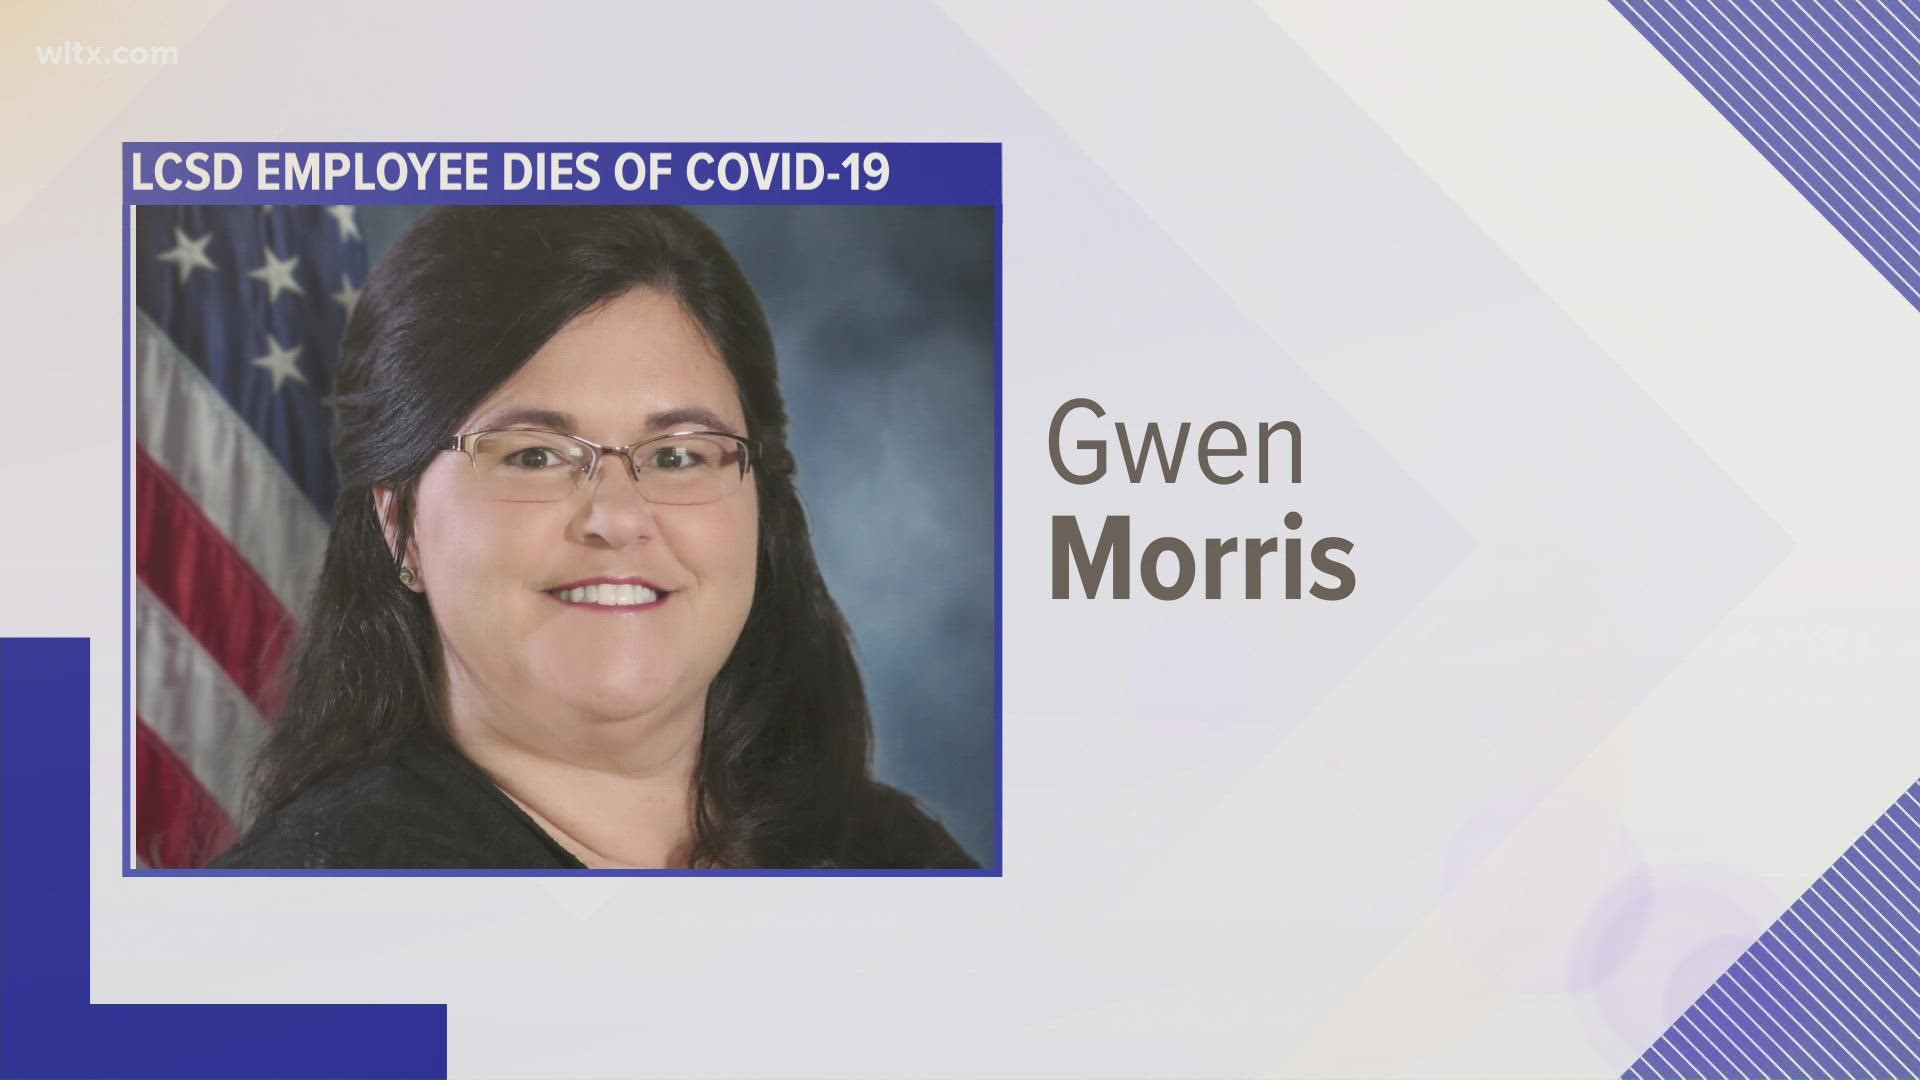 The Lexington County Sheriff's Department is mourning the loss of a member of its staff from COVID-19. Gwen Morris was a member of the finance department.